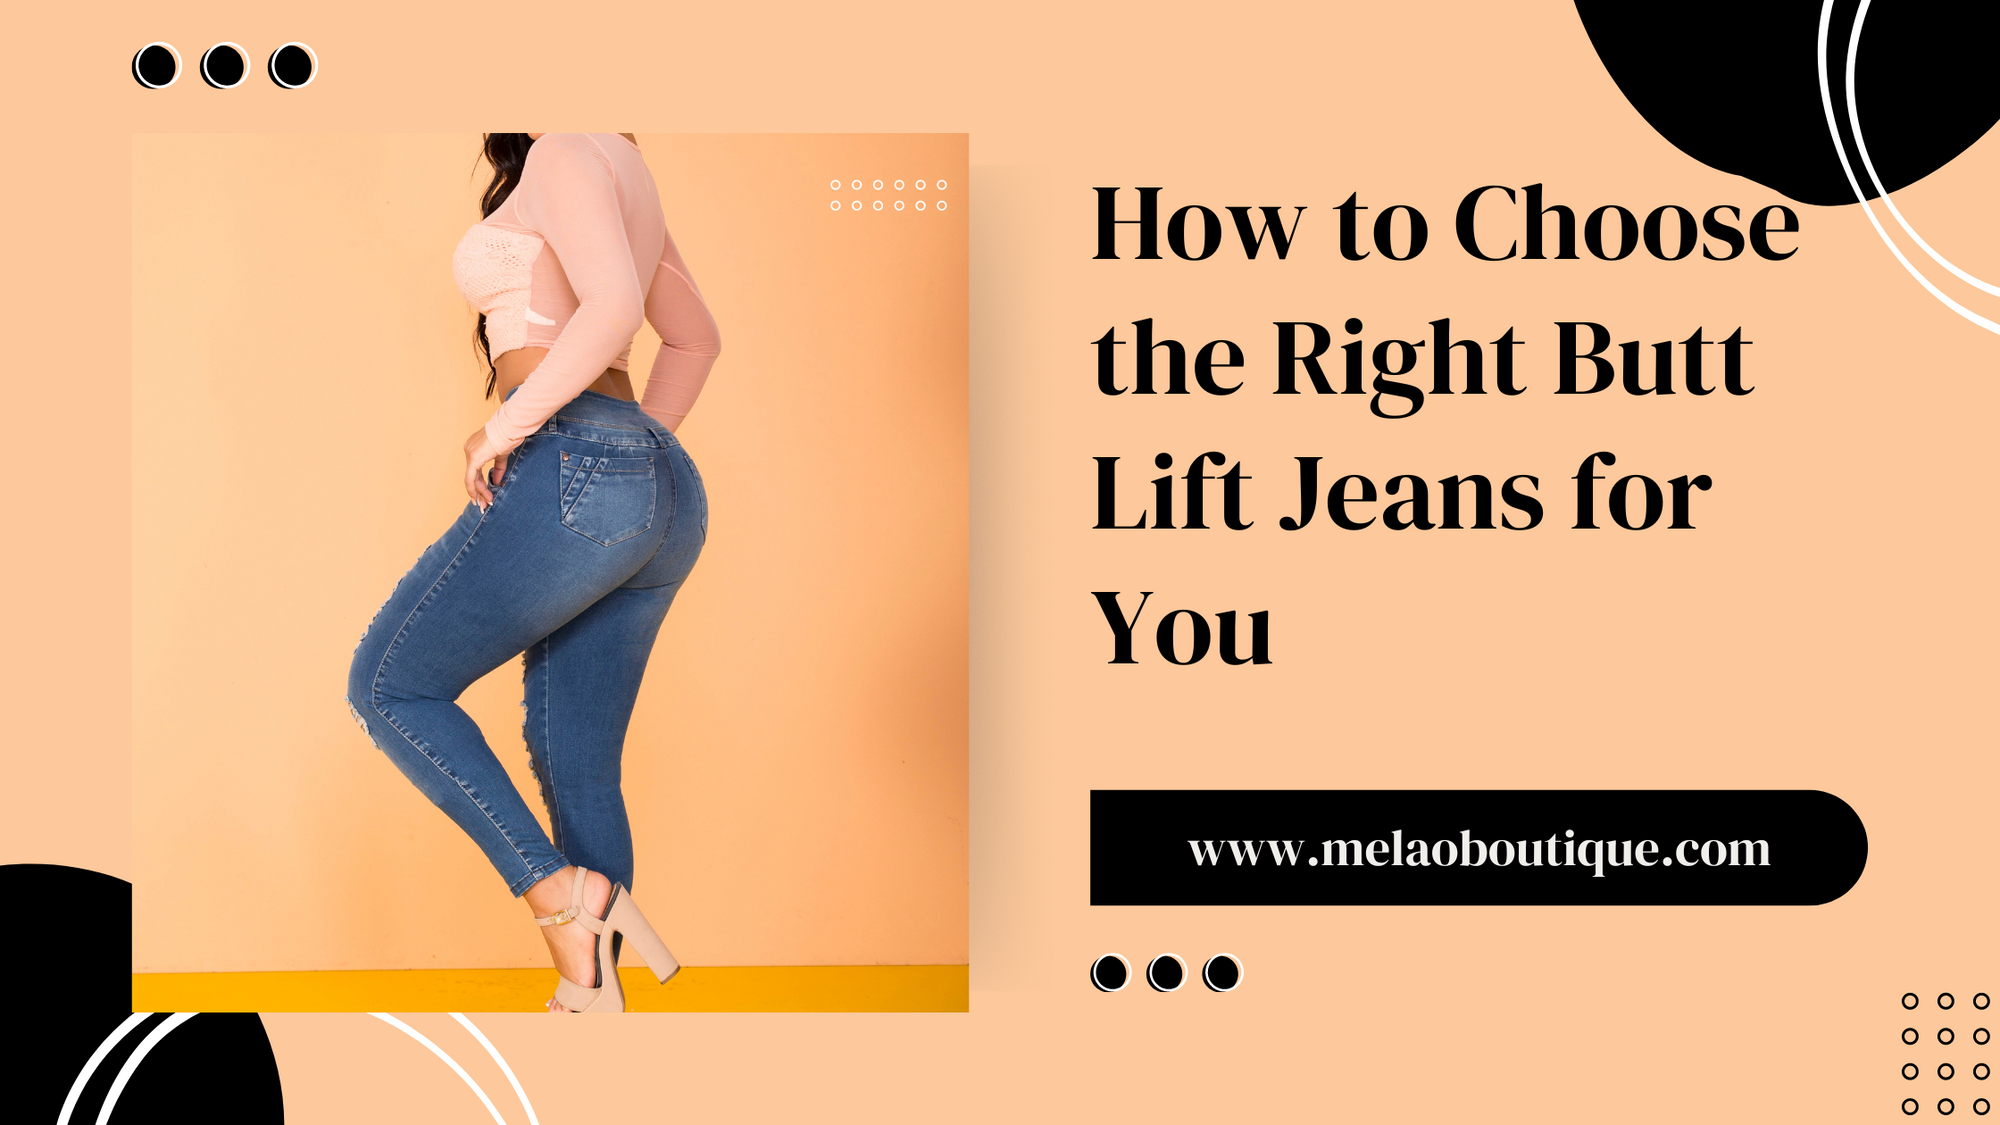 How to Choose the Right Butt Lift Jeans for You